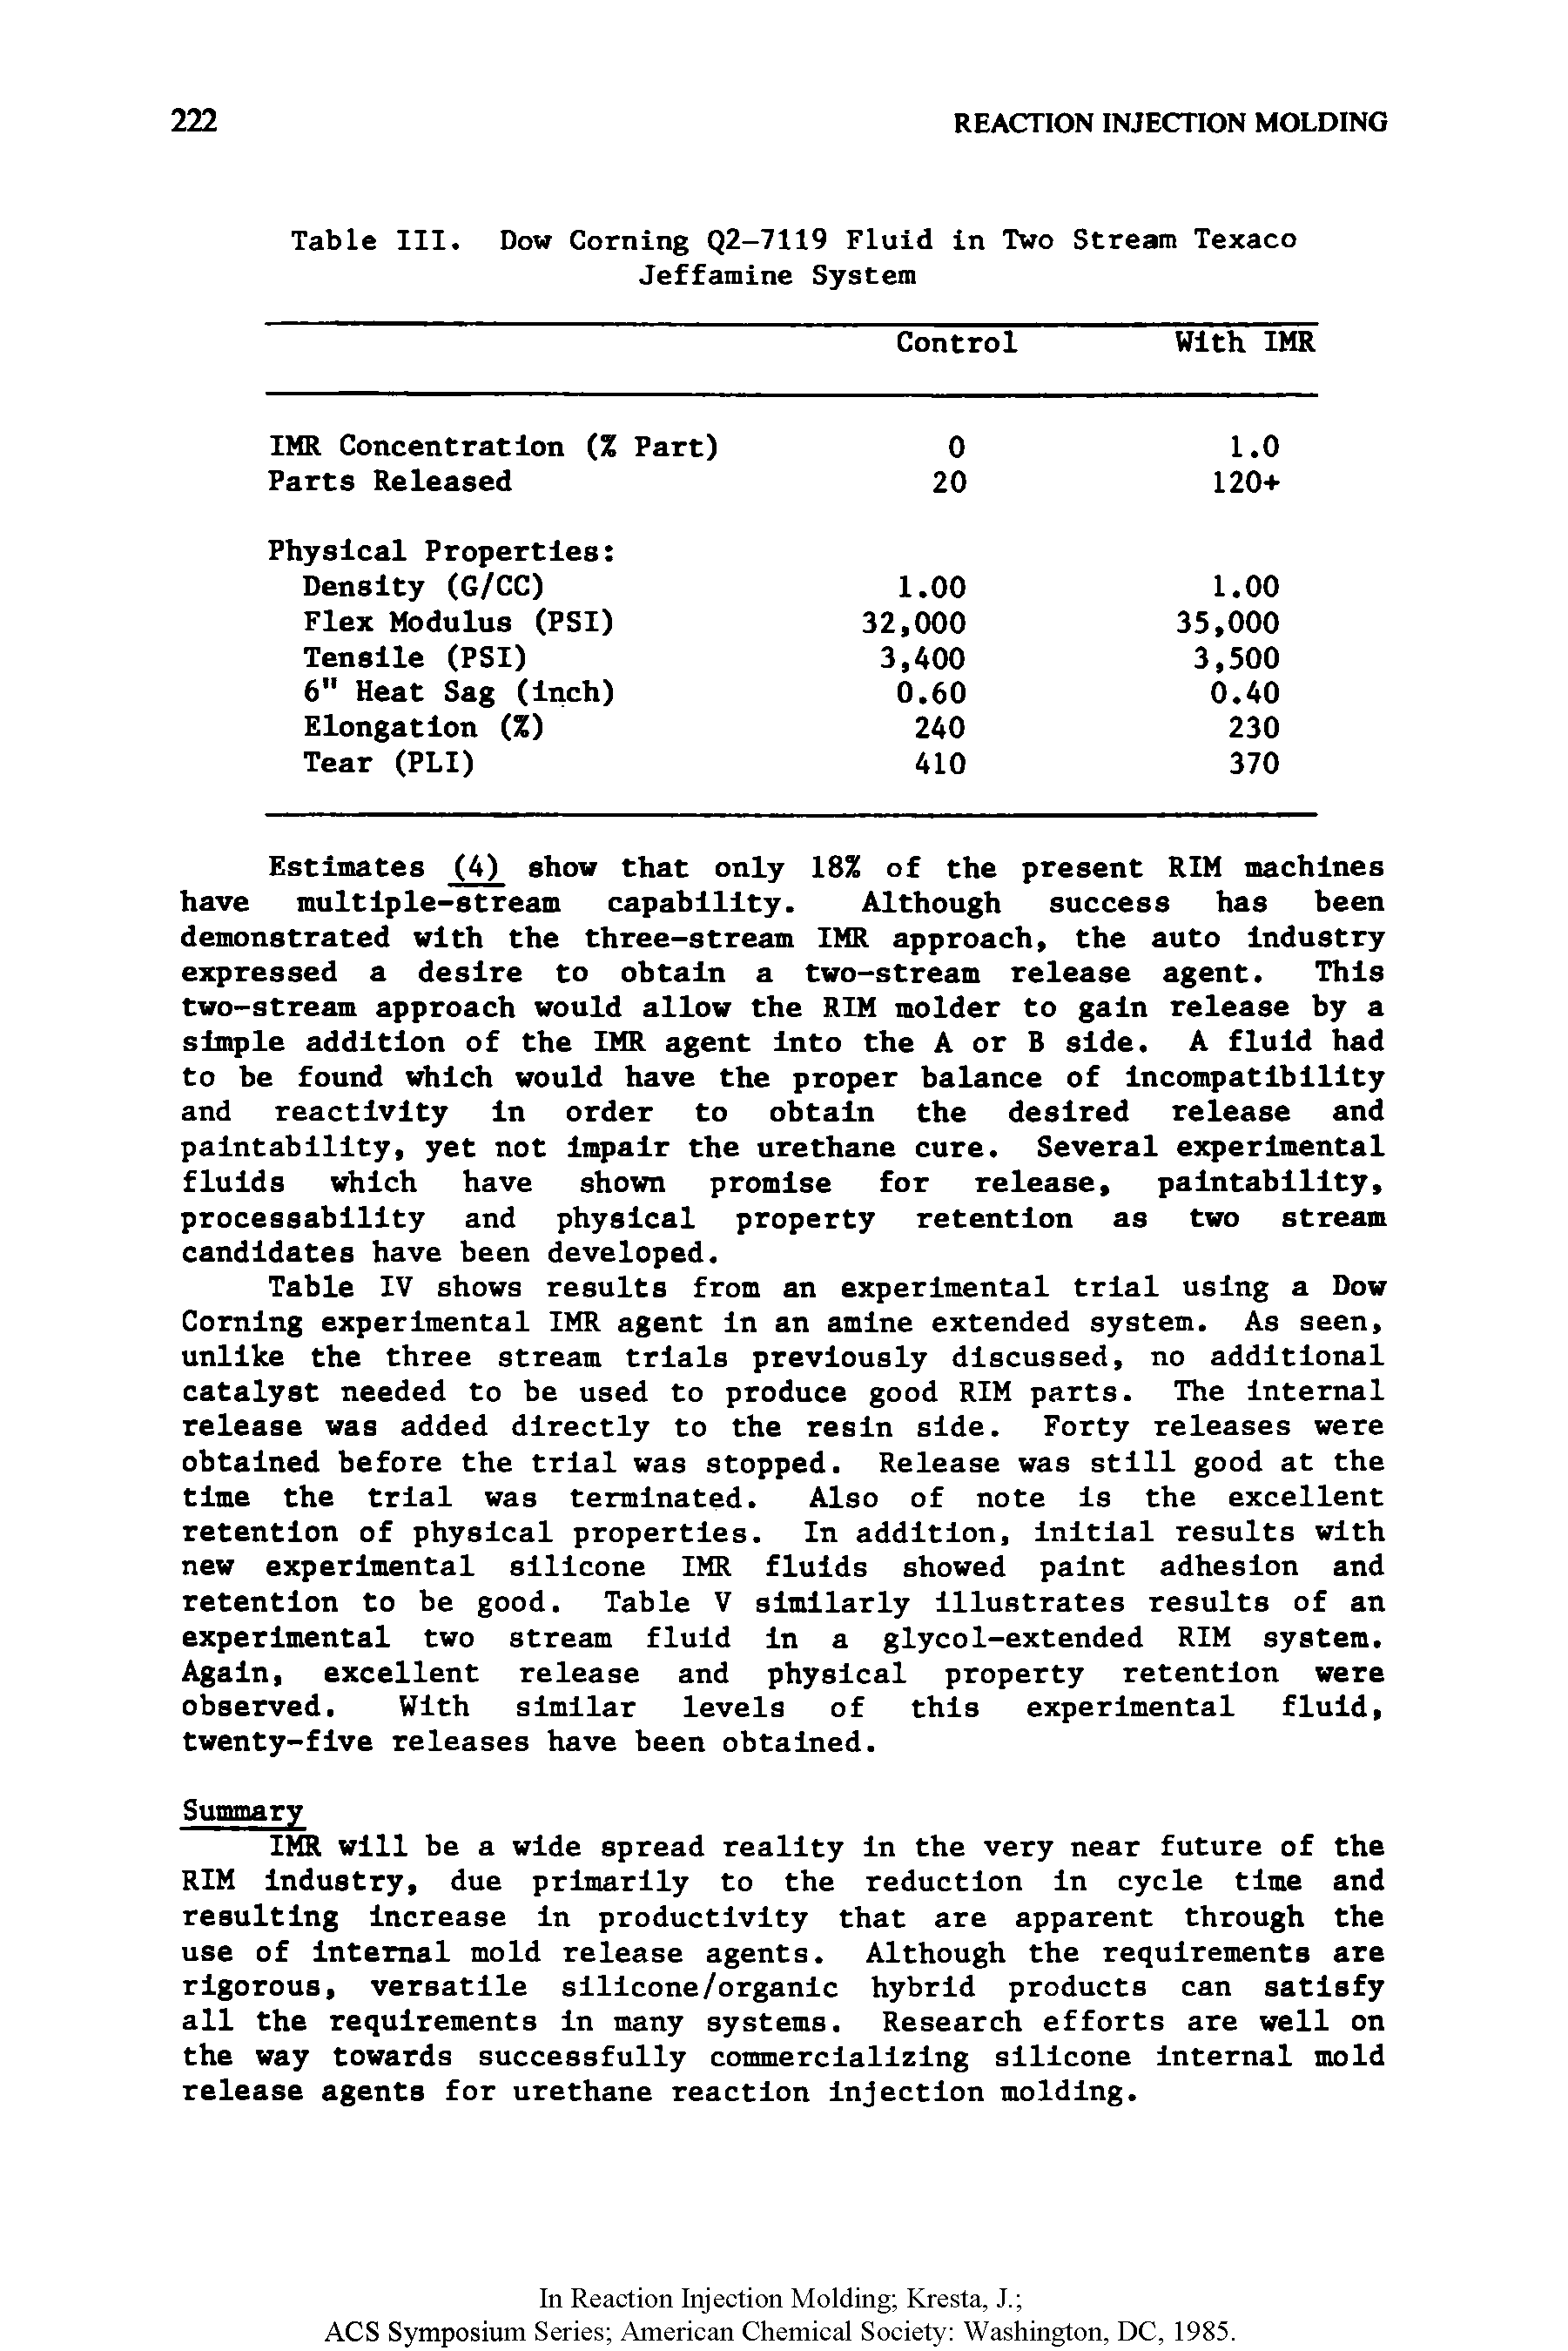 Table IV shows results from an experimental trial using a Dow Corning experimental IMR agent in an amine extended system. As seen, unlike the three stream trials previously discussed, no additional catalyst needed to be used to produce good RIM parts. The internal release was added directly to the resin side. Forty releases were obtained before the trial was stopped. Release was still good at the time the trial was terminated. Also of note is the excellent retention of physical properties. In addition, initial results with new experimental silicone IMR fluids showed paint adhesion and retention to be good. Table V similarly illustrates results of an experimental two stream fluid in a glycol-extended RIM system. Again, excellent release and physical property retention were observed. With similar levels of this experimental fluid, twenty-five releases have been obtained.